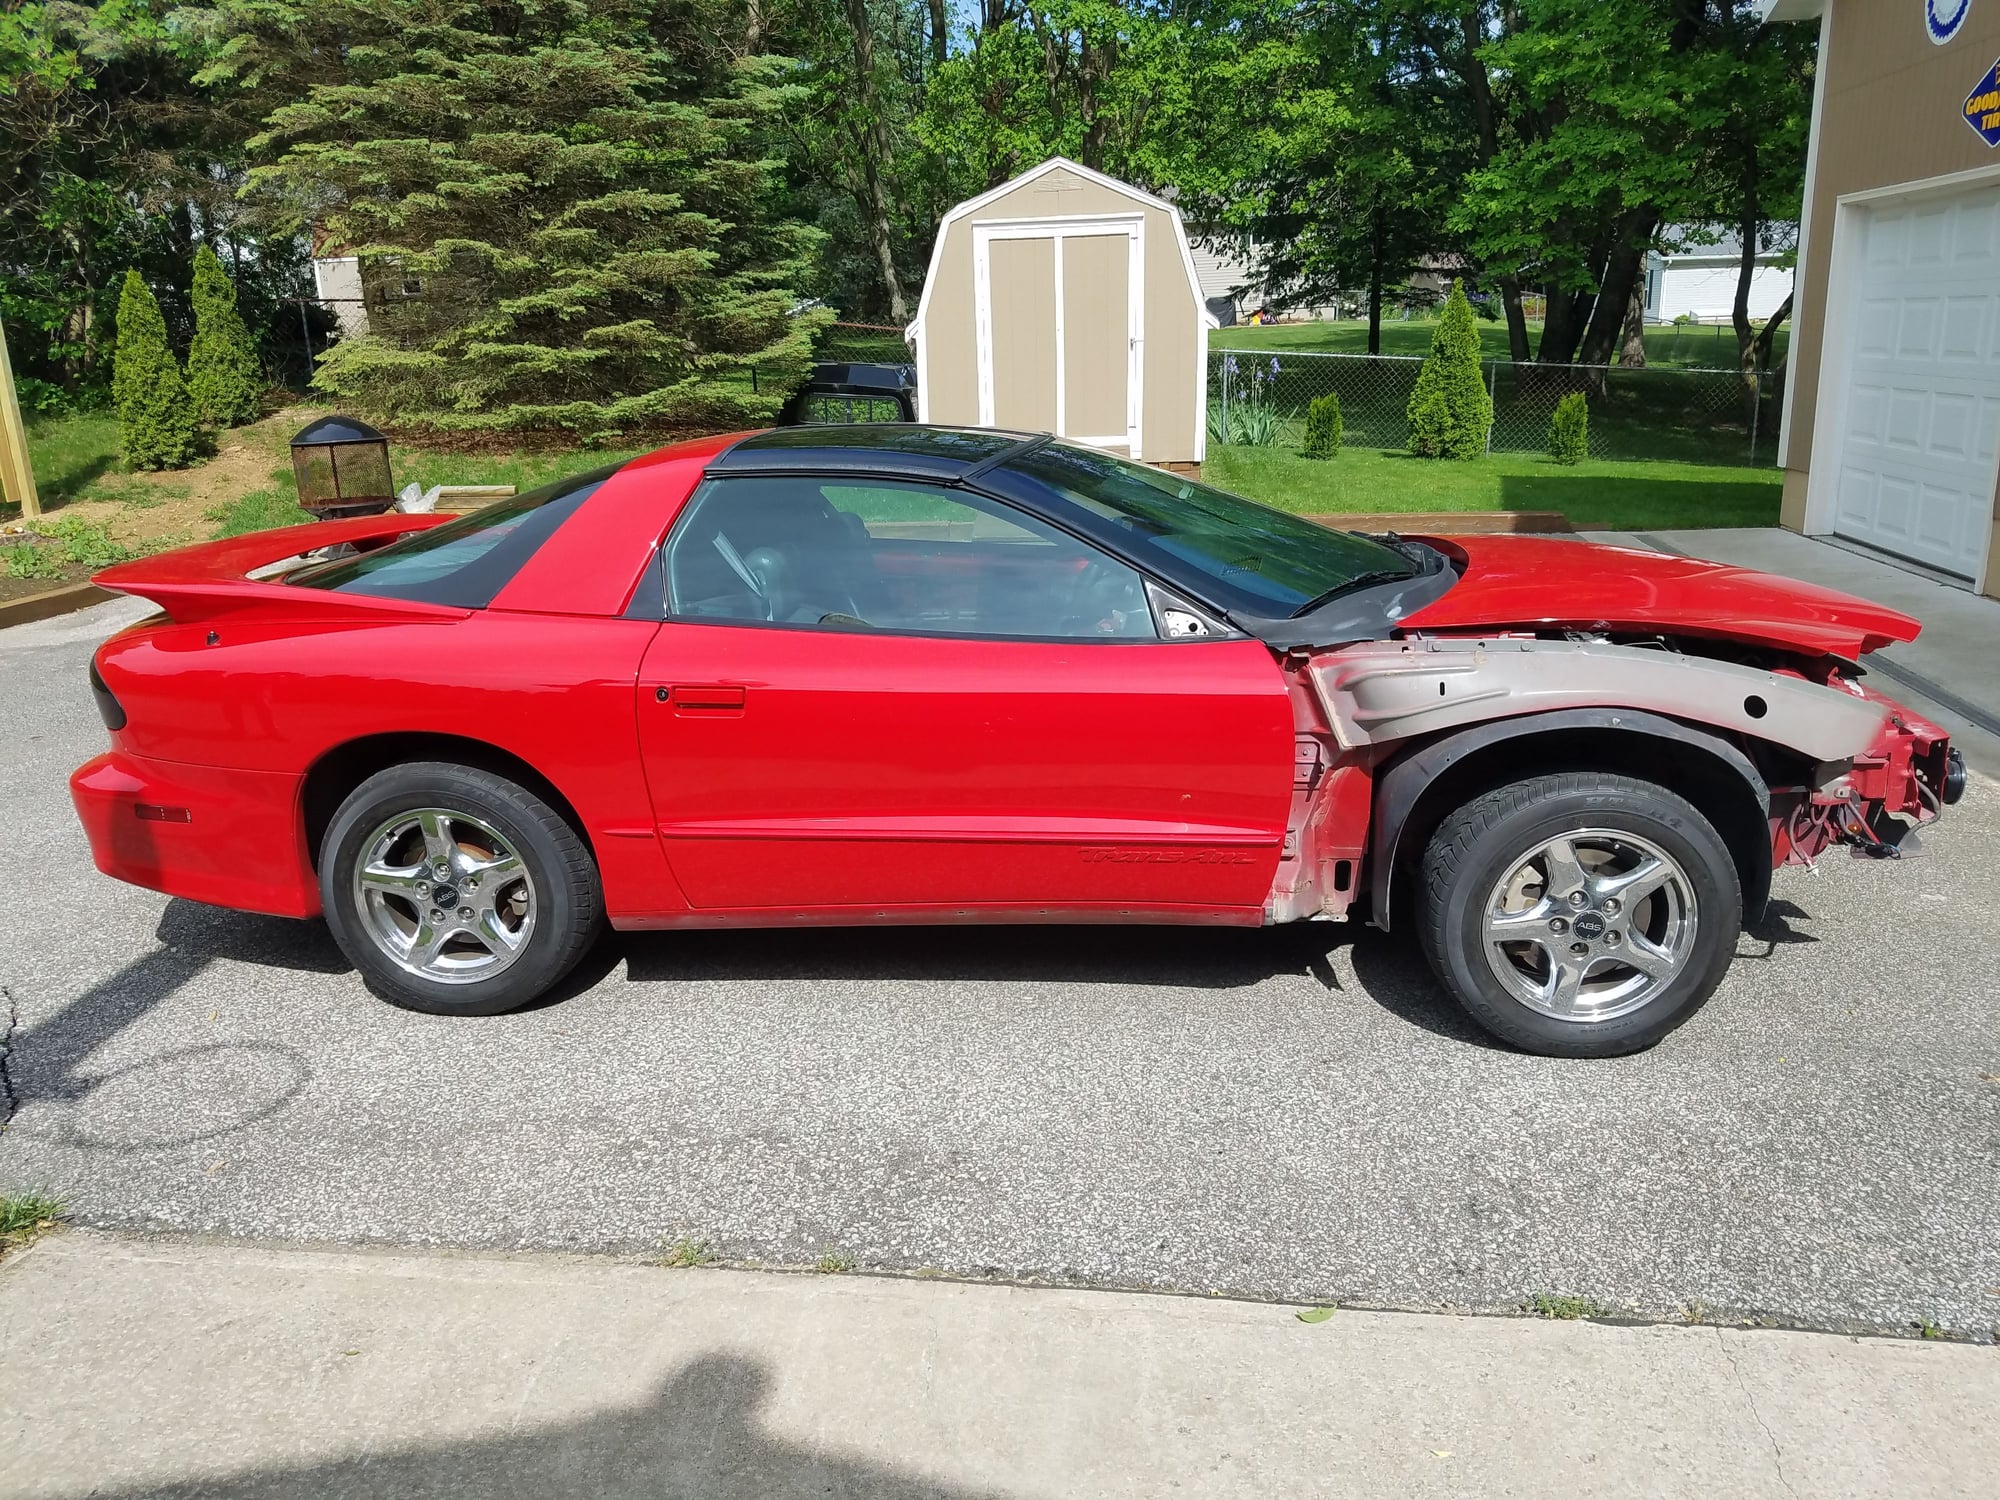 1999 Pontiac Firebird - 1999 Trans Am 6-Speed Roller - Used - VIN 2G2FV22G1X2219418 - 122,000 Miles - 2WD - Manual - Coupe - Red - La Porte, IN 46350, United States